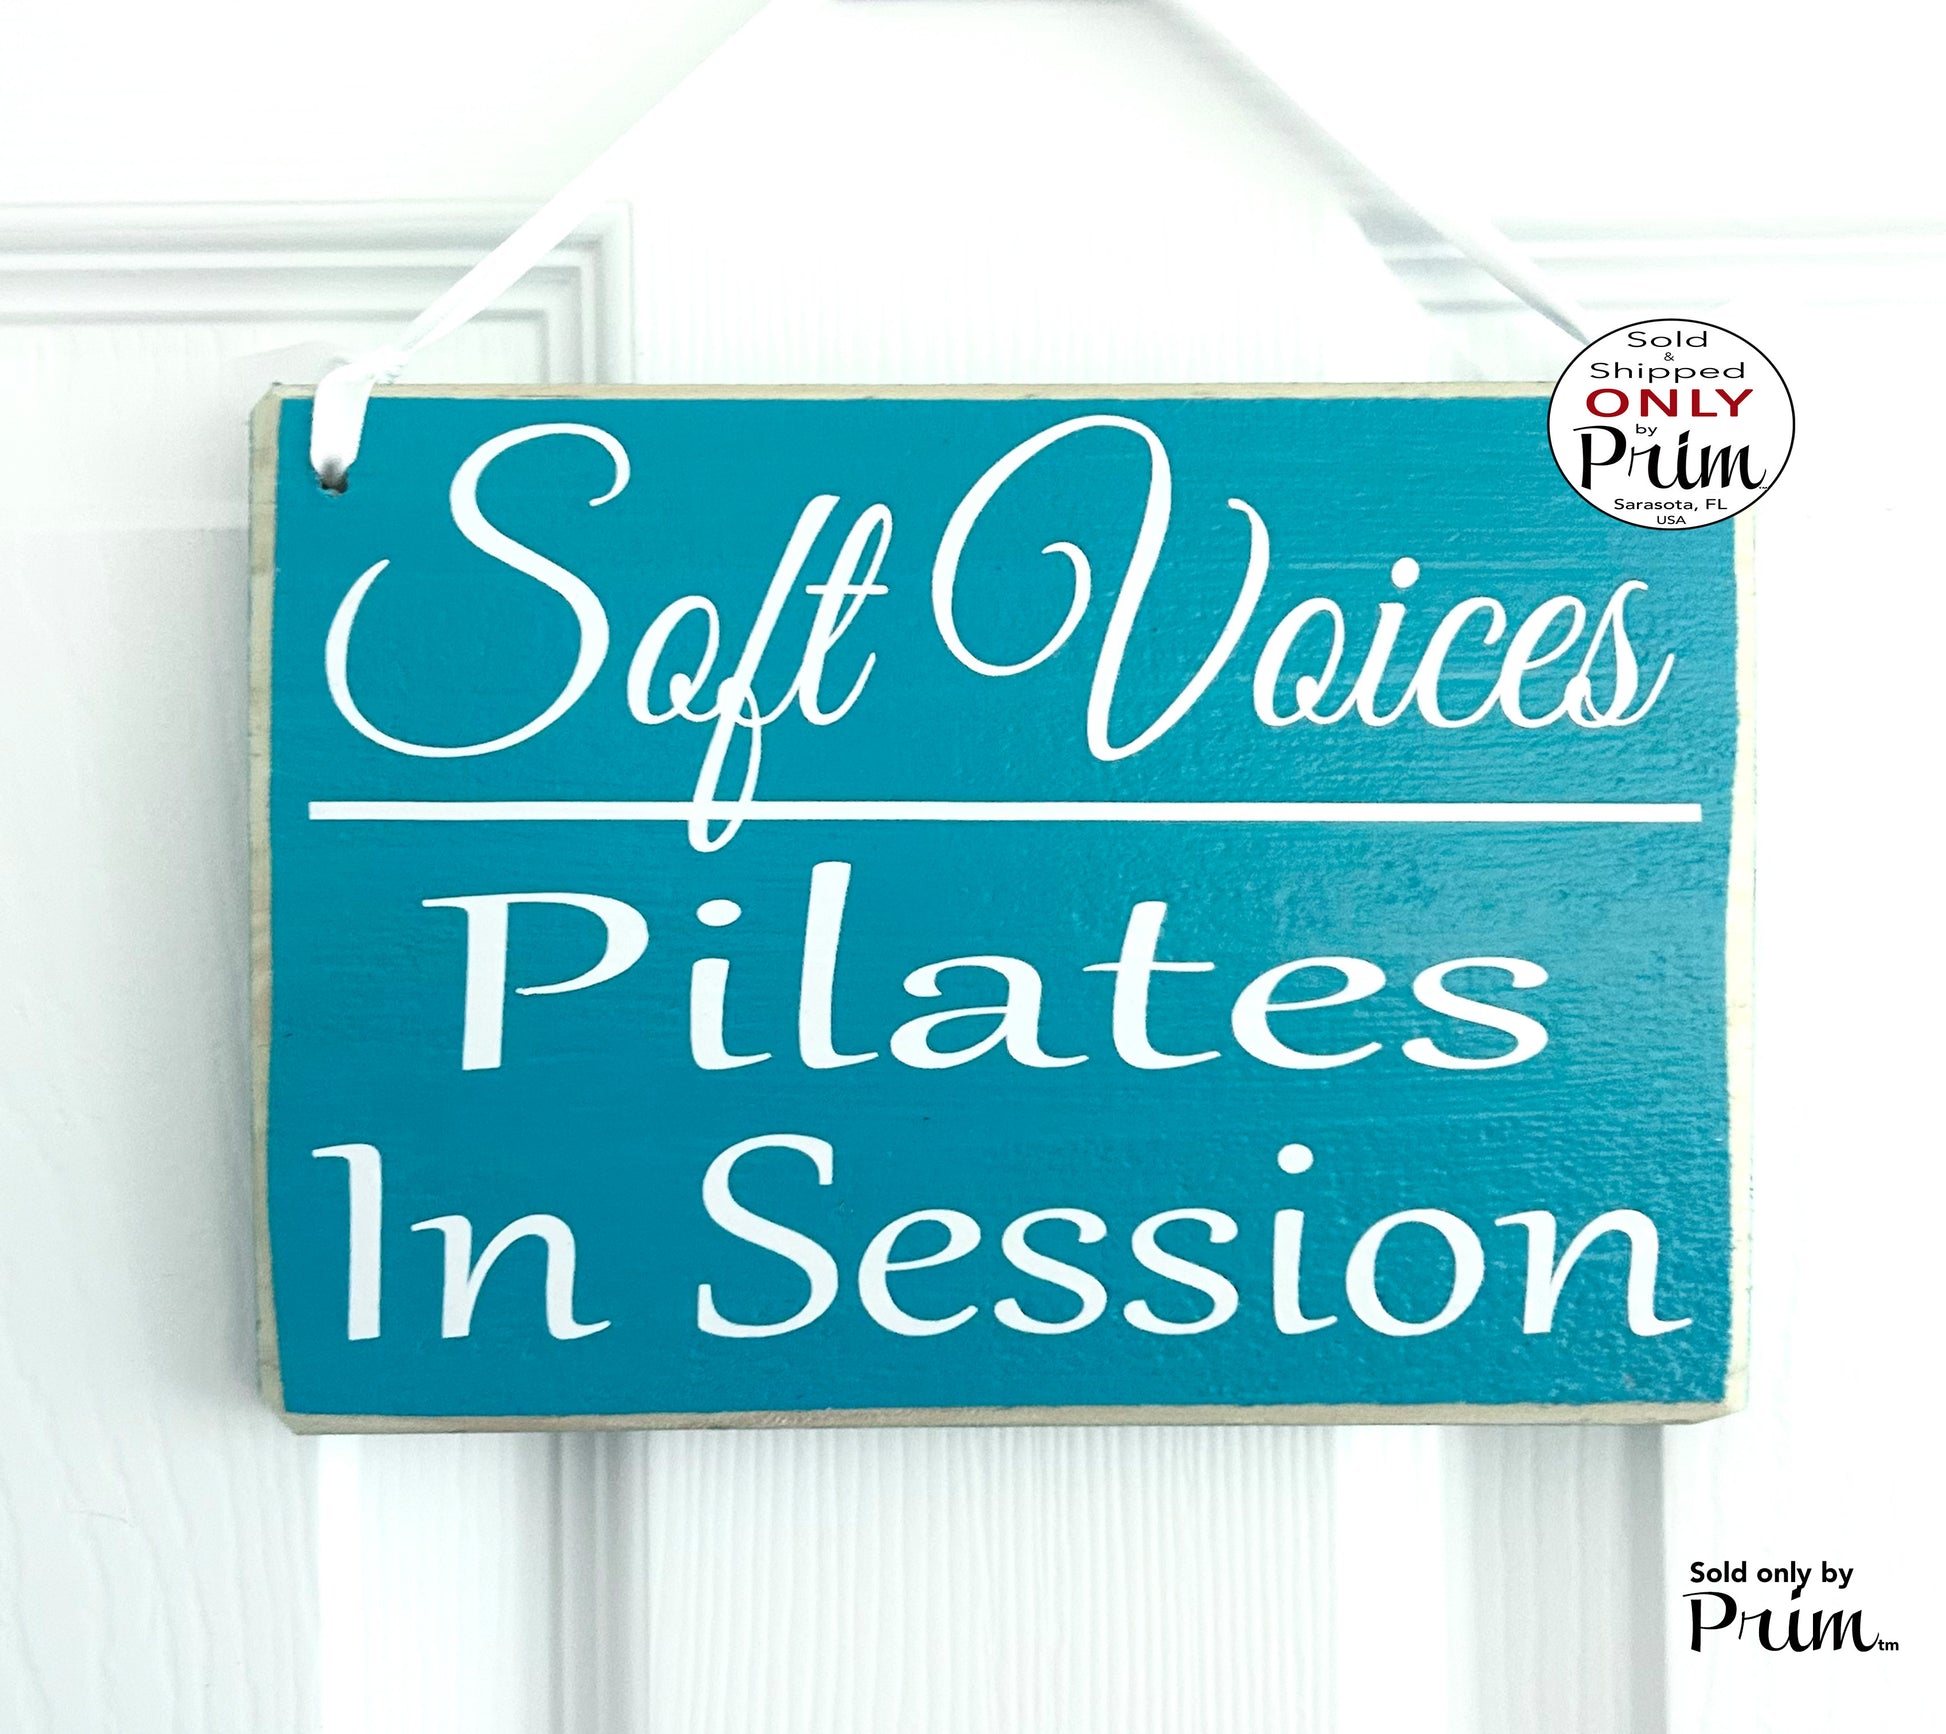 Designs by Prim 8x6 Soft Voices Pilates In Session Custom Wood Sign Class In Session Please Do Not Disturb | Fitness Yoga Namaste Relaxation Door Plaque